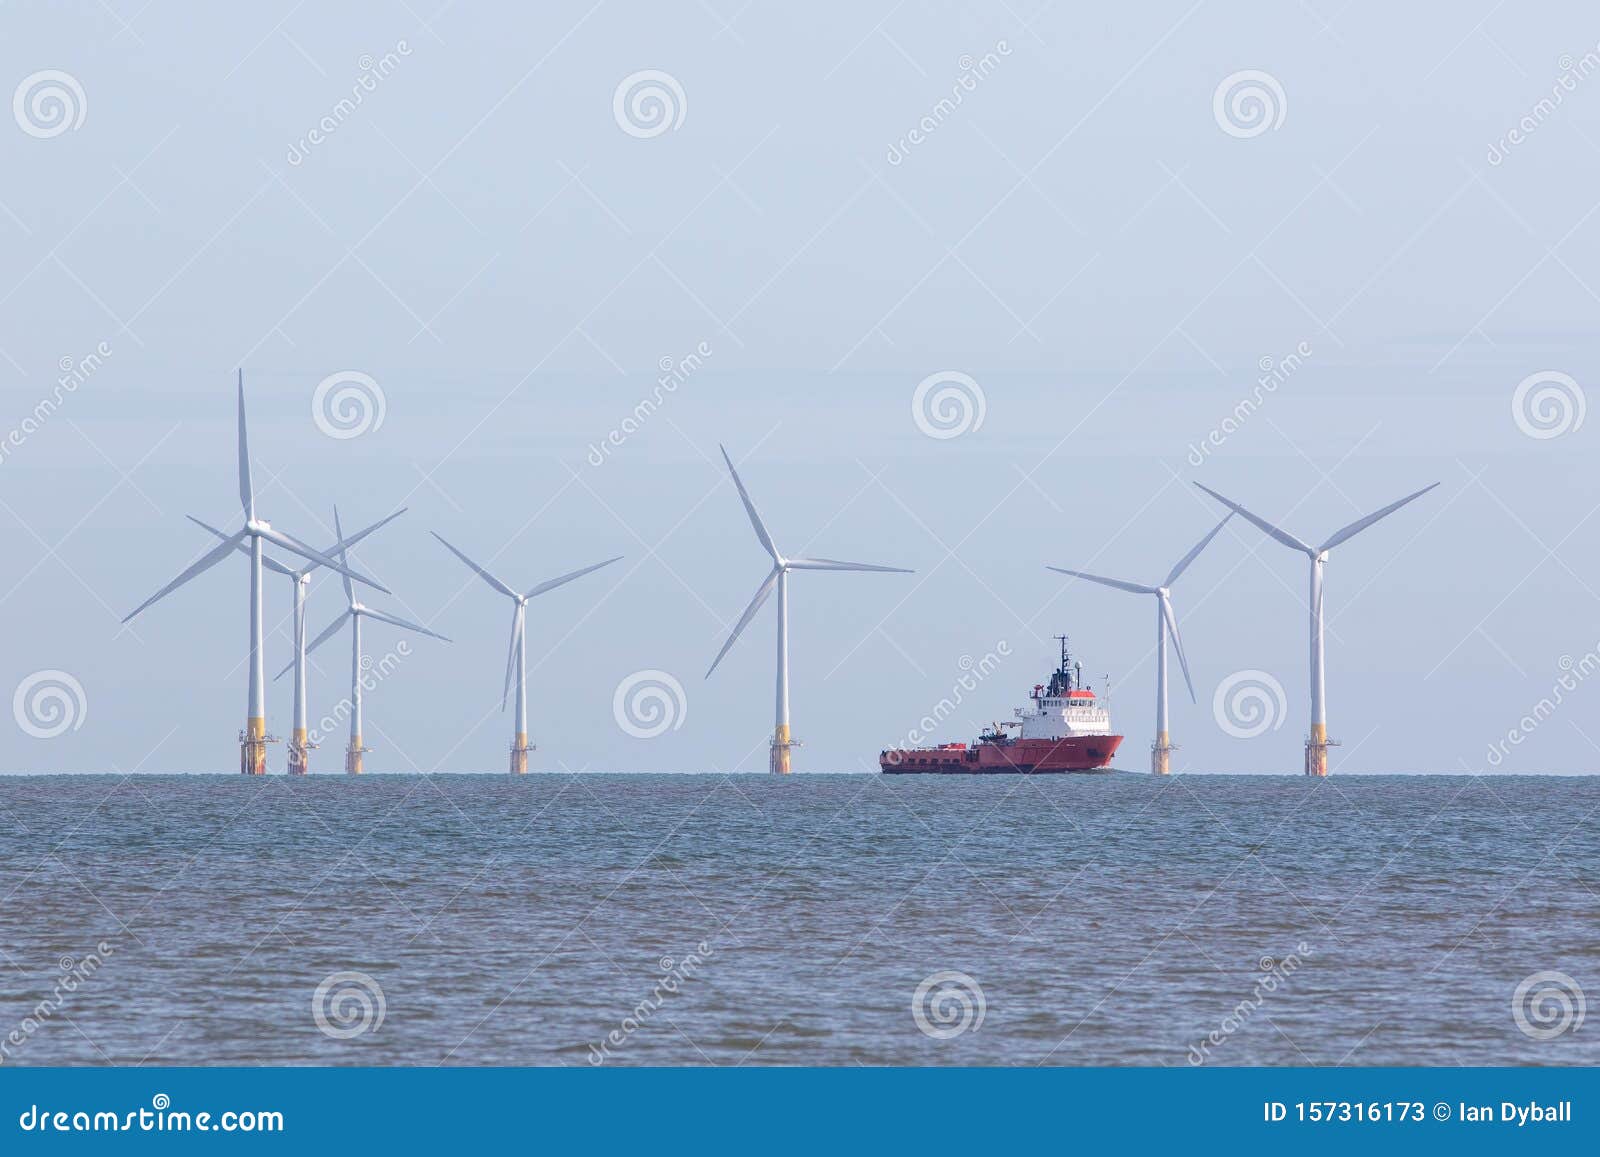 offshore wind farm turbines with maintenance supply vessel ship